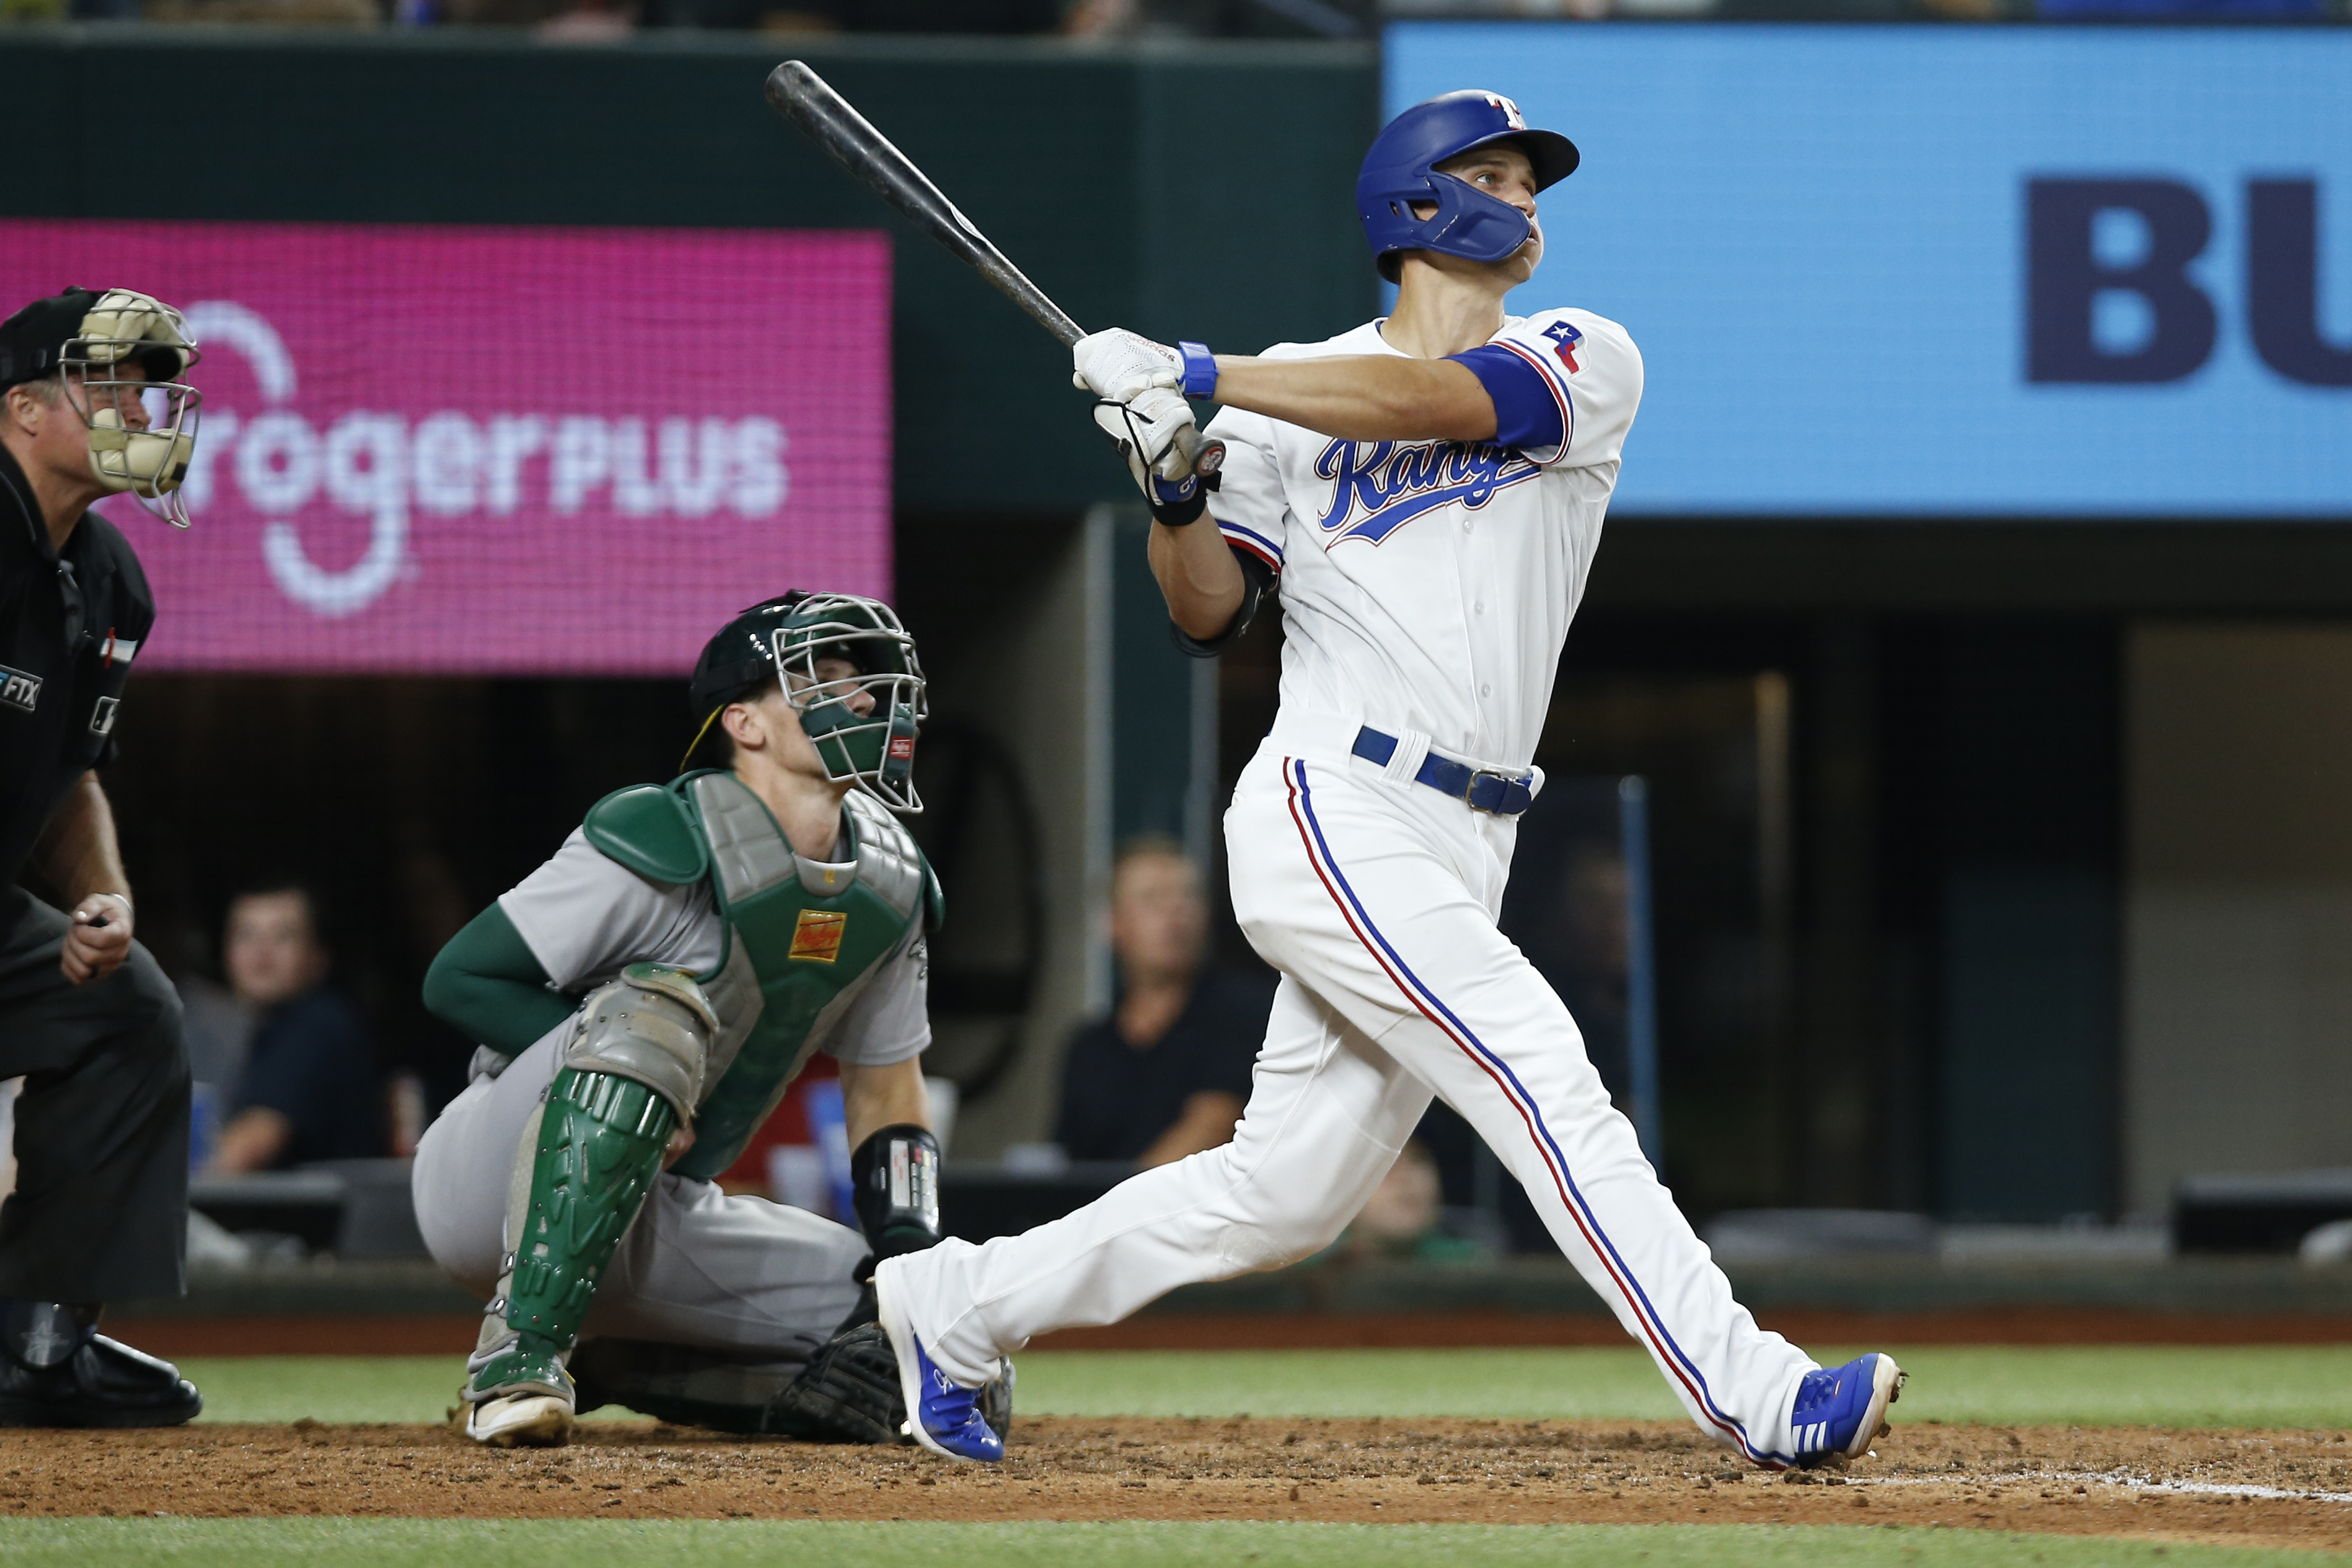 Rangers' Corey Seager to Replace George Springer in All-Star Game - Sports  Illustrated